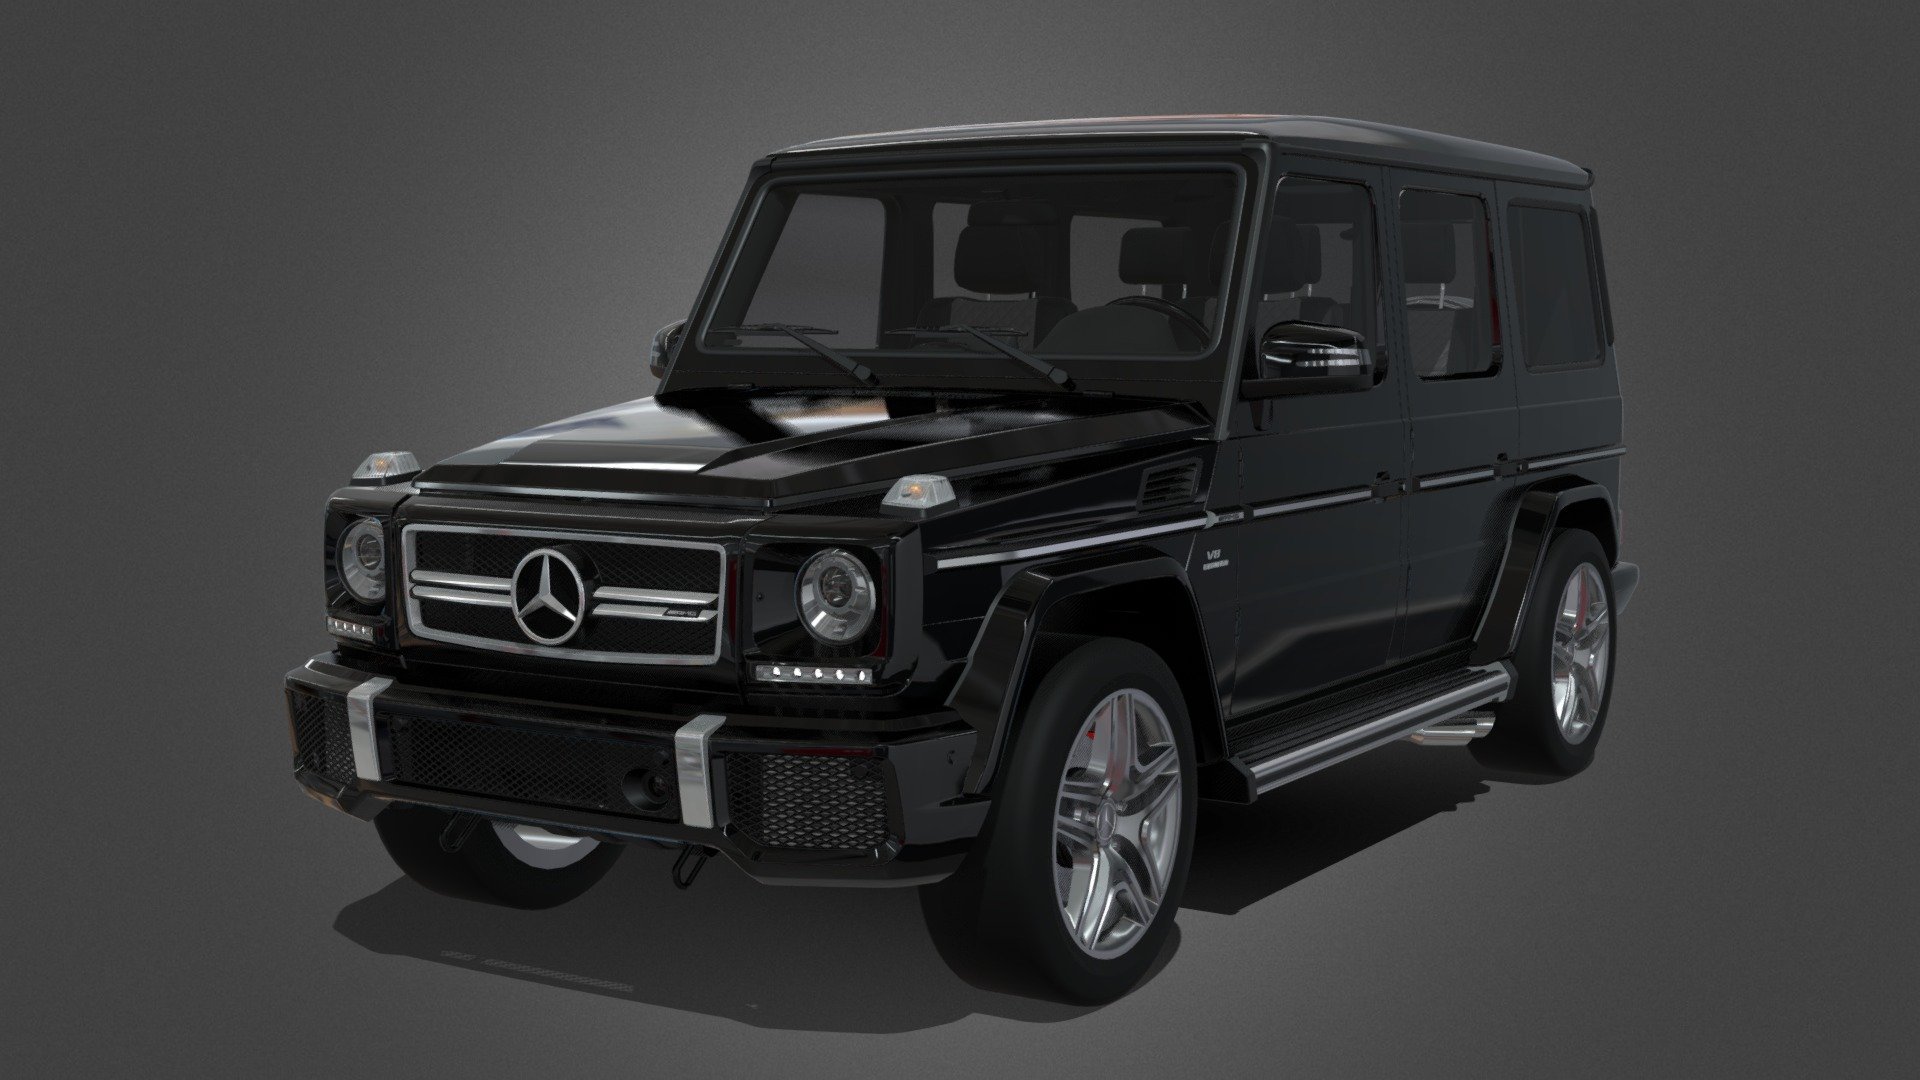 G-WAGON



Detailed interior, original Mercedes V8 engine, suspension and underbody.

All doors, trunk and hood are interoperable.

High-quality and well-optimized mesh.

UV unwrapping of all elements.

The body and interrior colors can be changed in one click.

All elements and materials are correctly named.

All proportions are respected.

 - Mercedes-Benz G63 AMG (2015) - Buy Royalty Free 3D model by GORDEYKOMARK 3d model